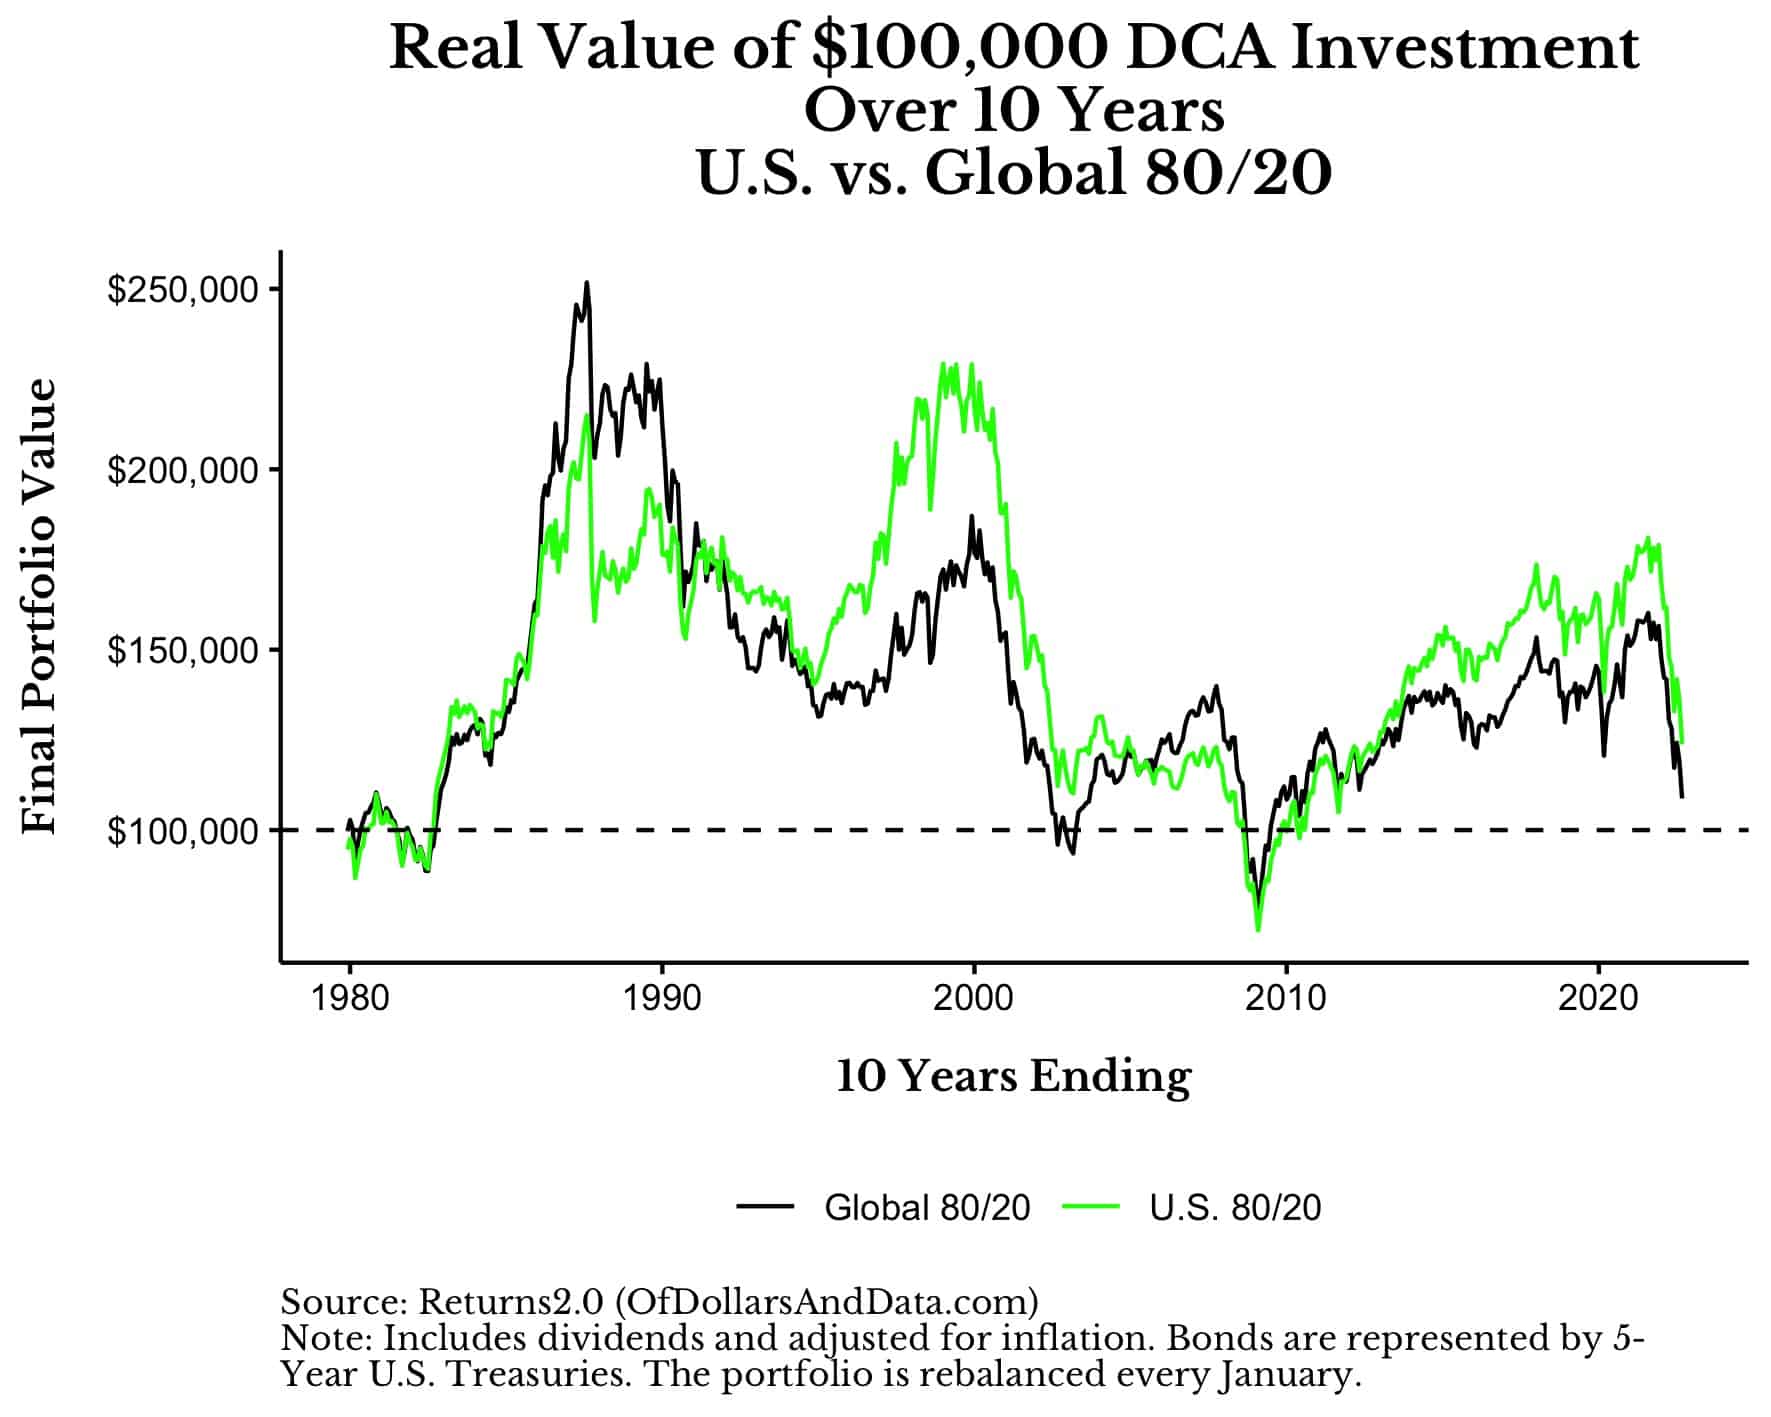 Real value of $100,000 DCA investment into US 80/20 and Global 80/20 over 10 years from 1970 to 2022.